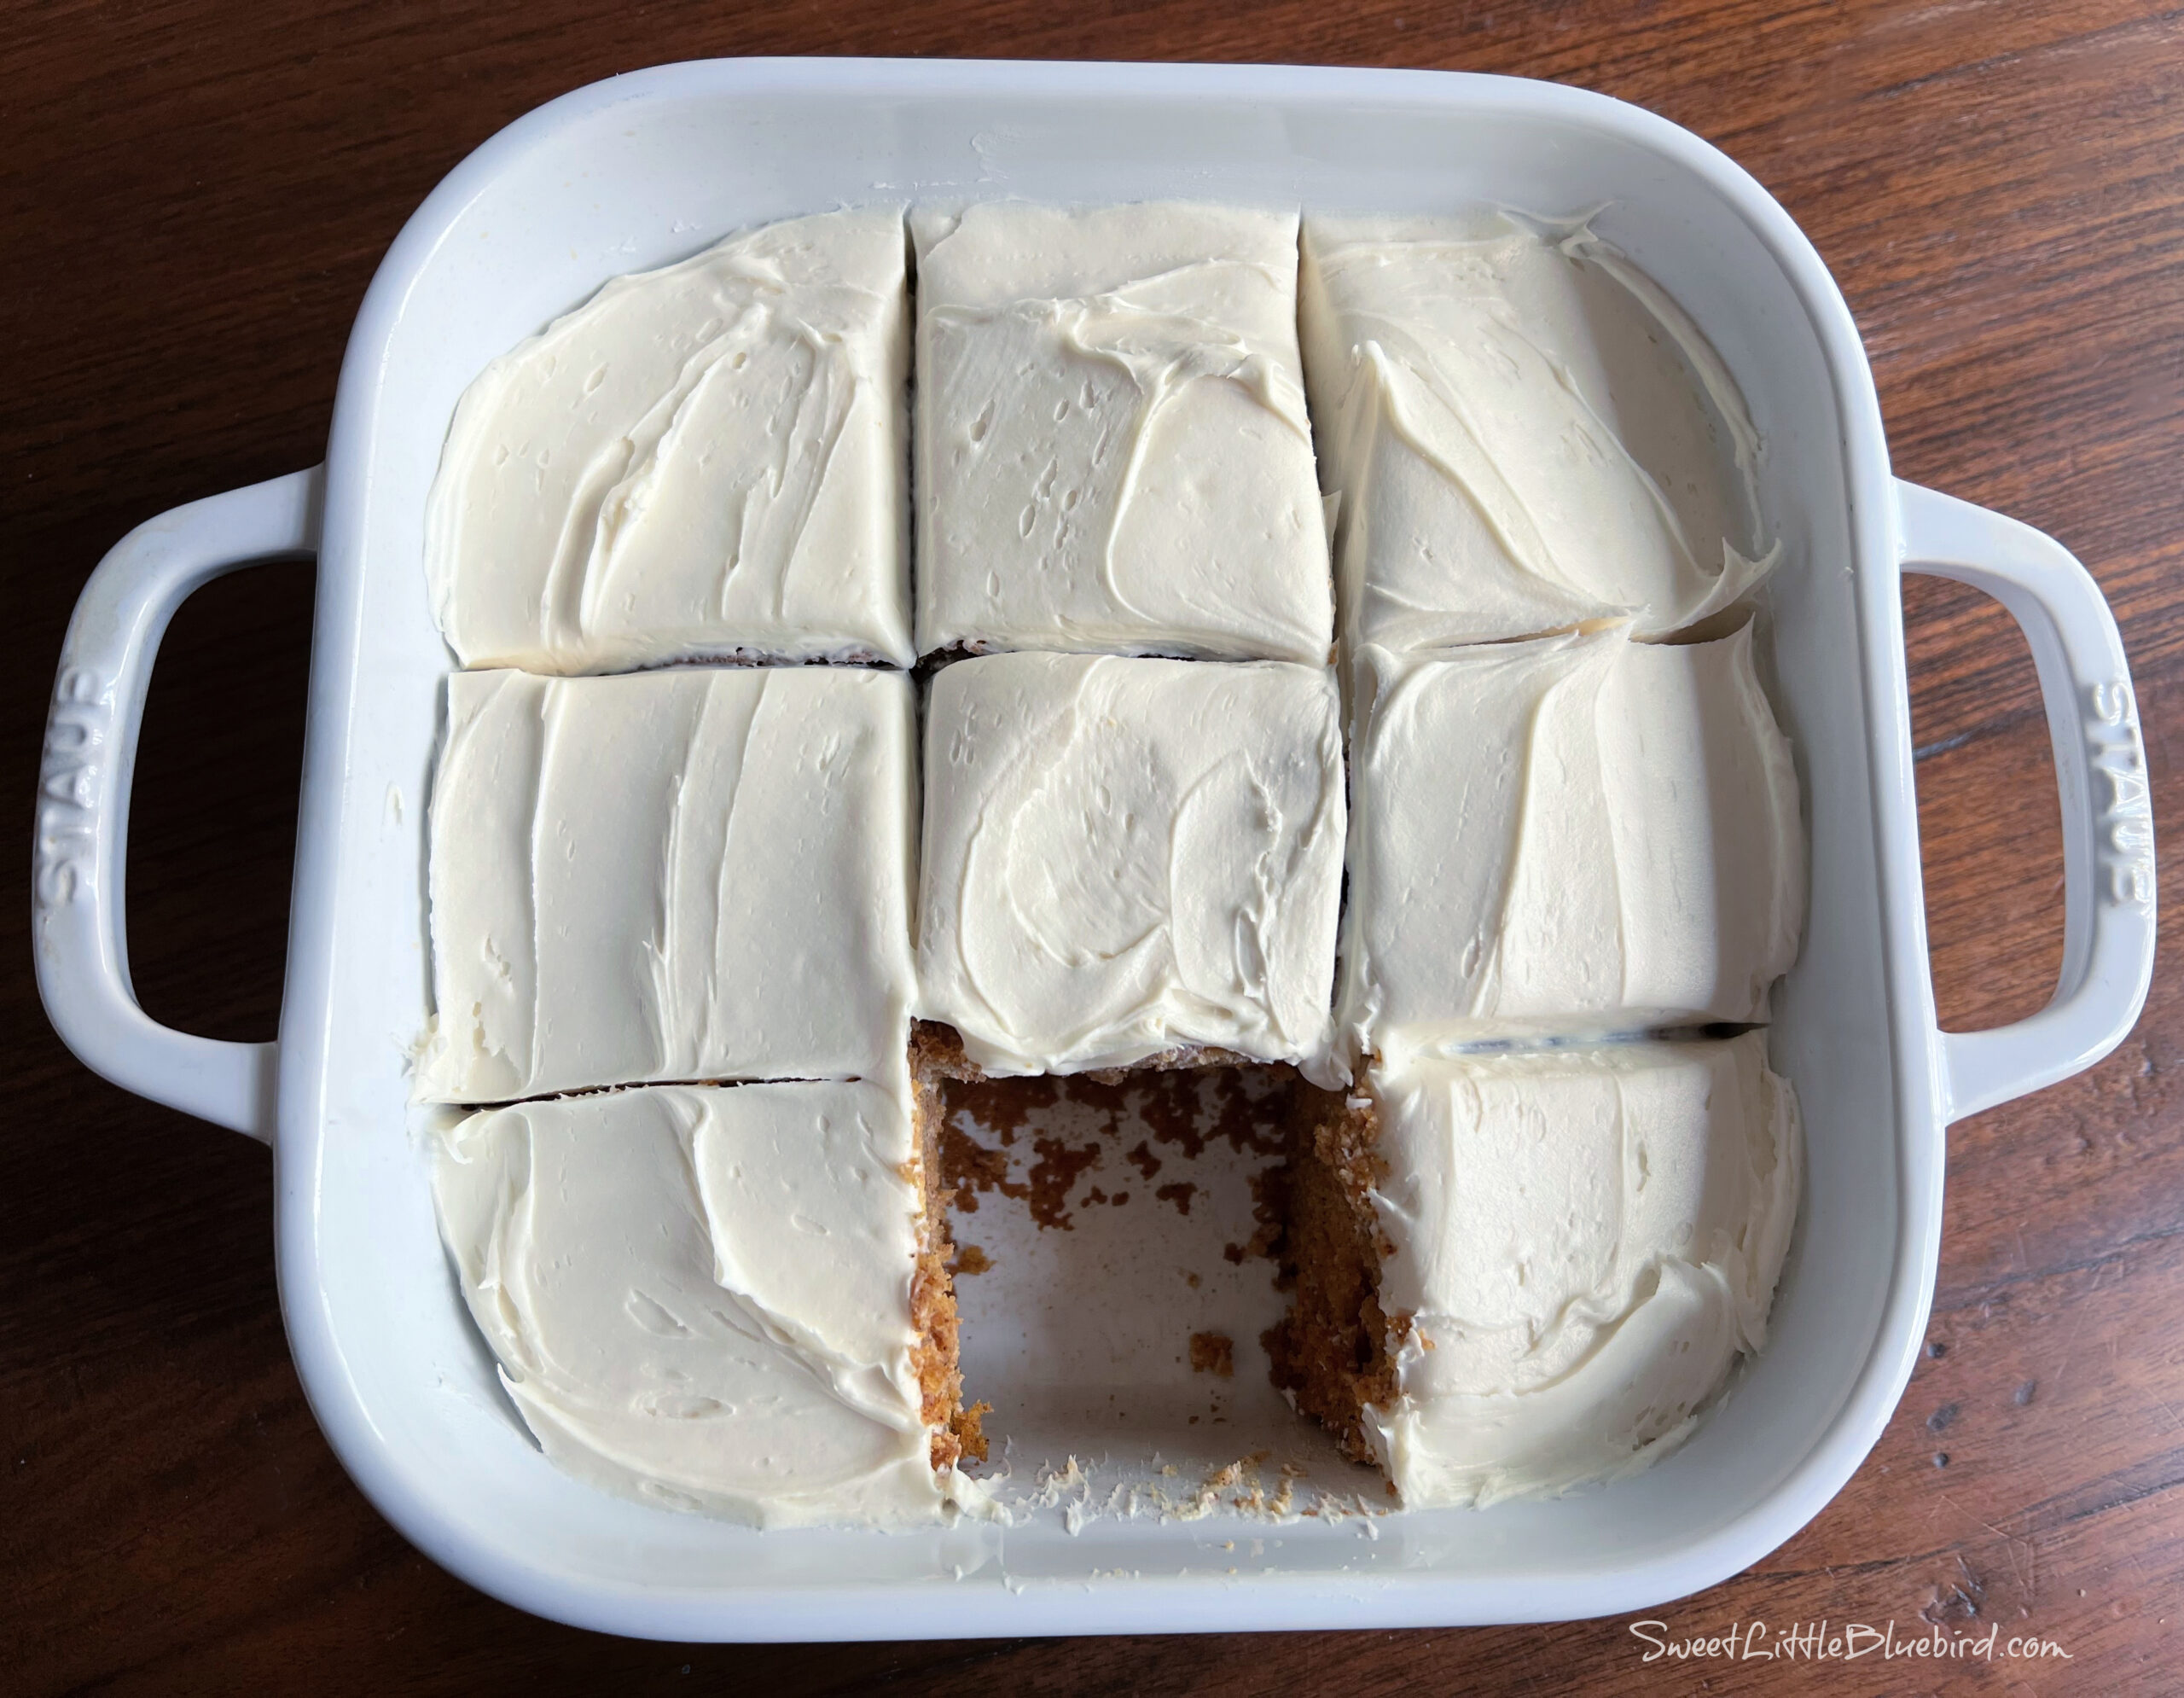 Photo of Pumpkin Crazy Cake after baking with vanilla frosting in a white 8x8 inch baking dish cut into 9 square slices with a slice removed.